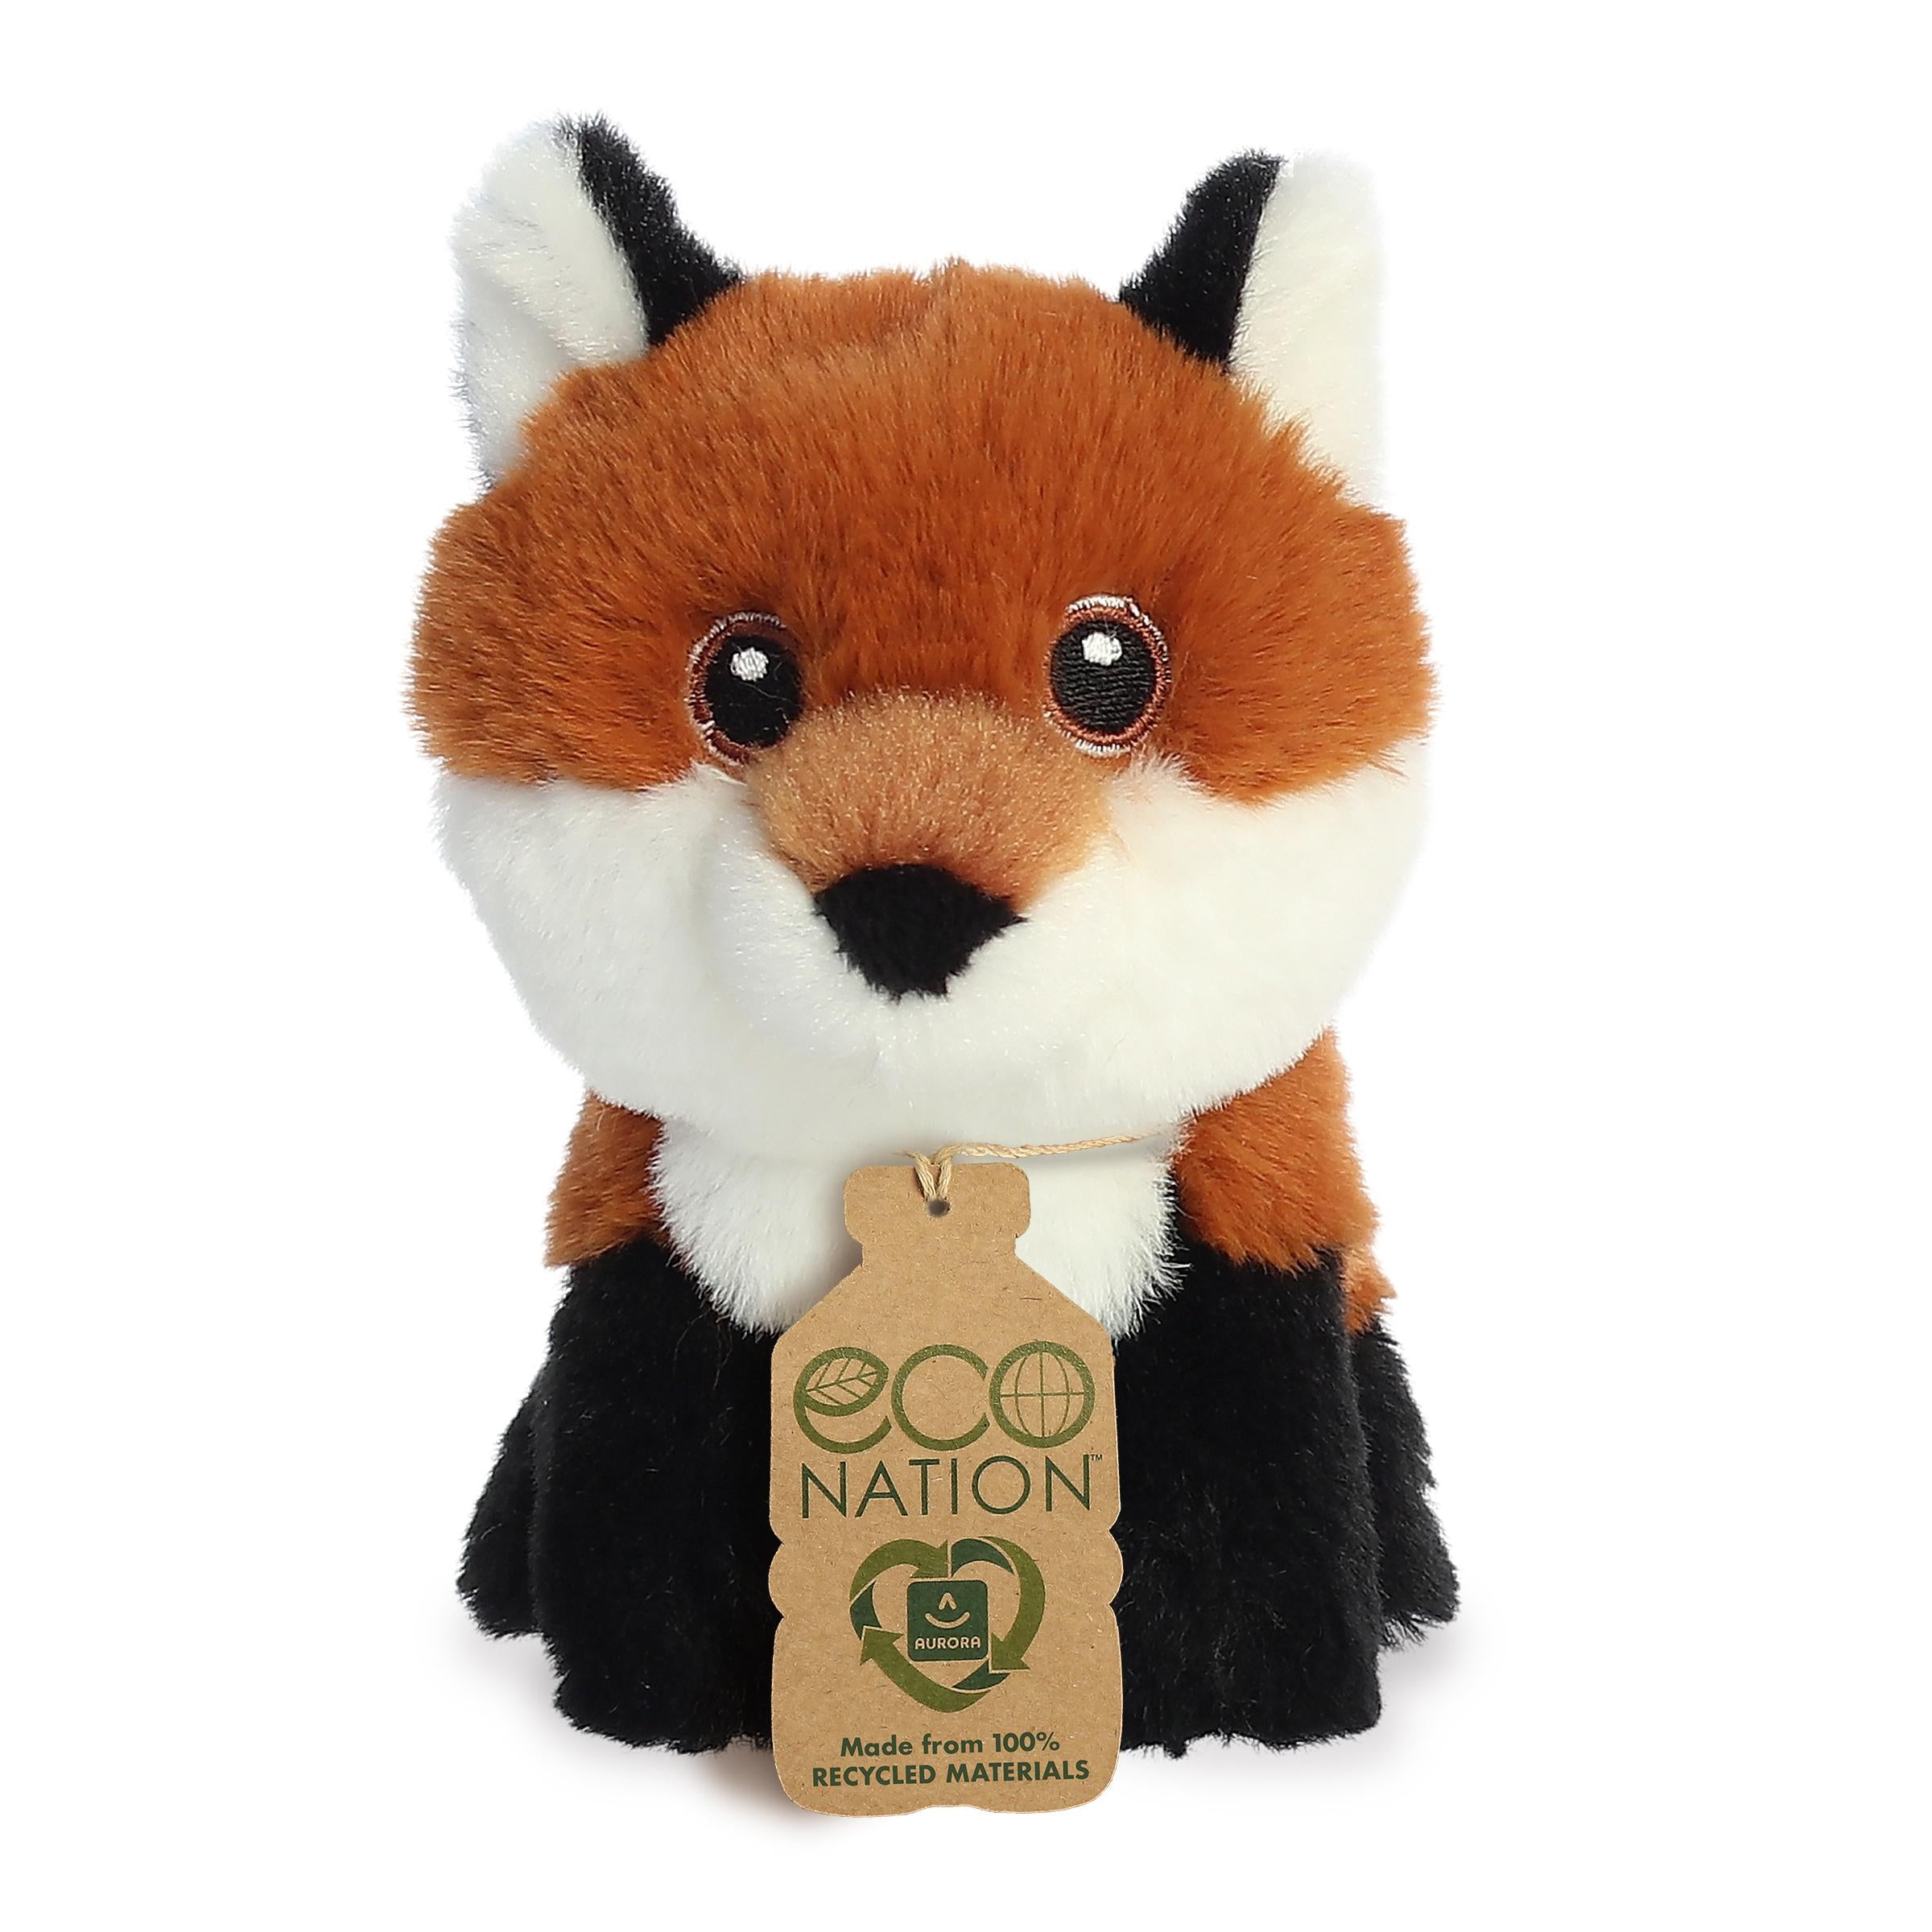 A huggable mini fox plush with orange and white fur, cute black boots, adorable embroidered eyes, and an eco-nation tag